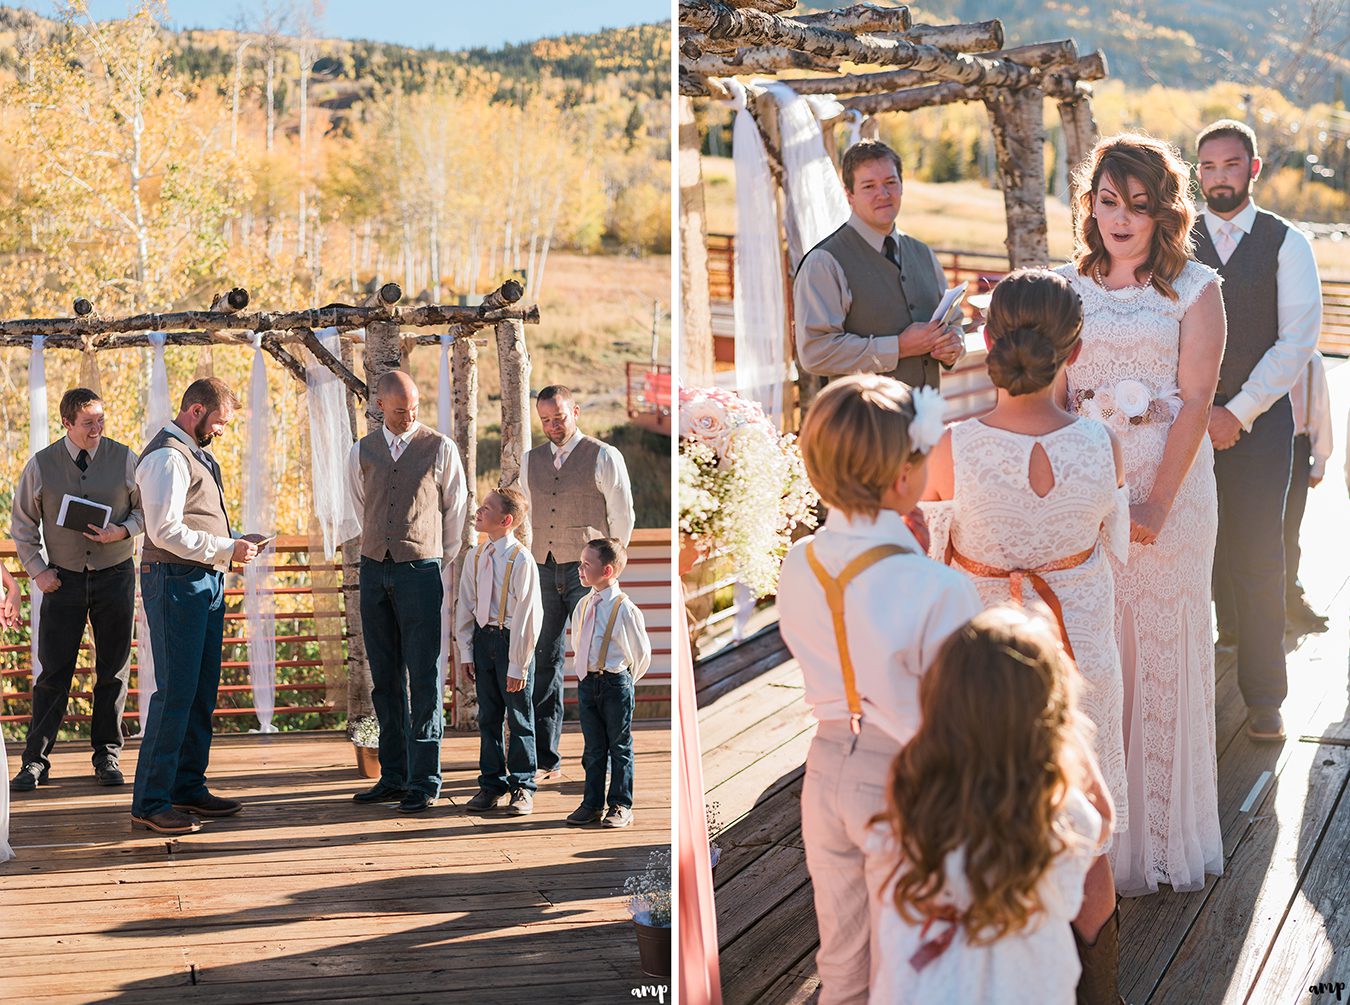 Bride and groom make promises to each other's children